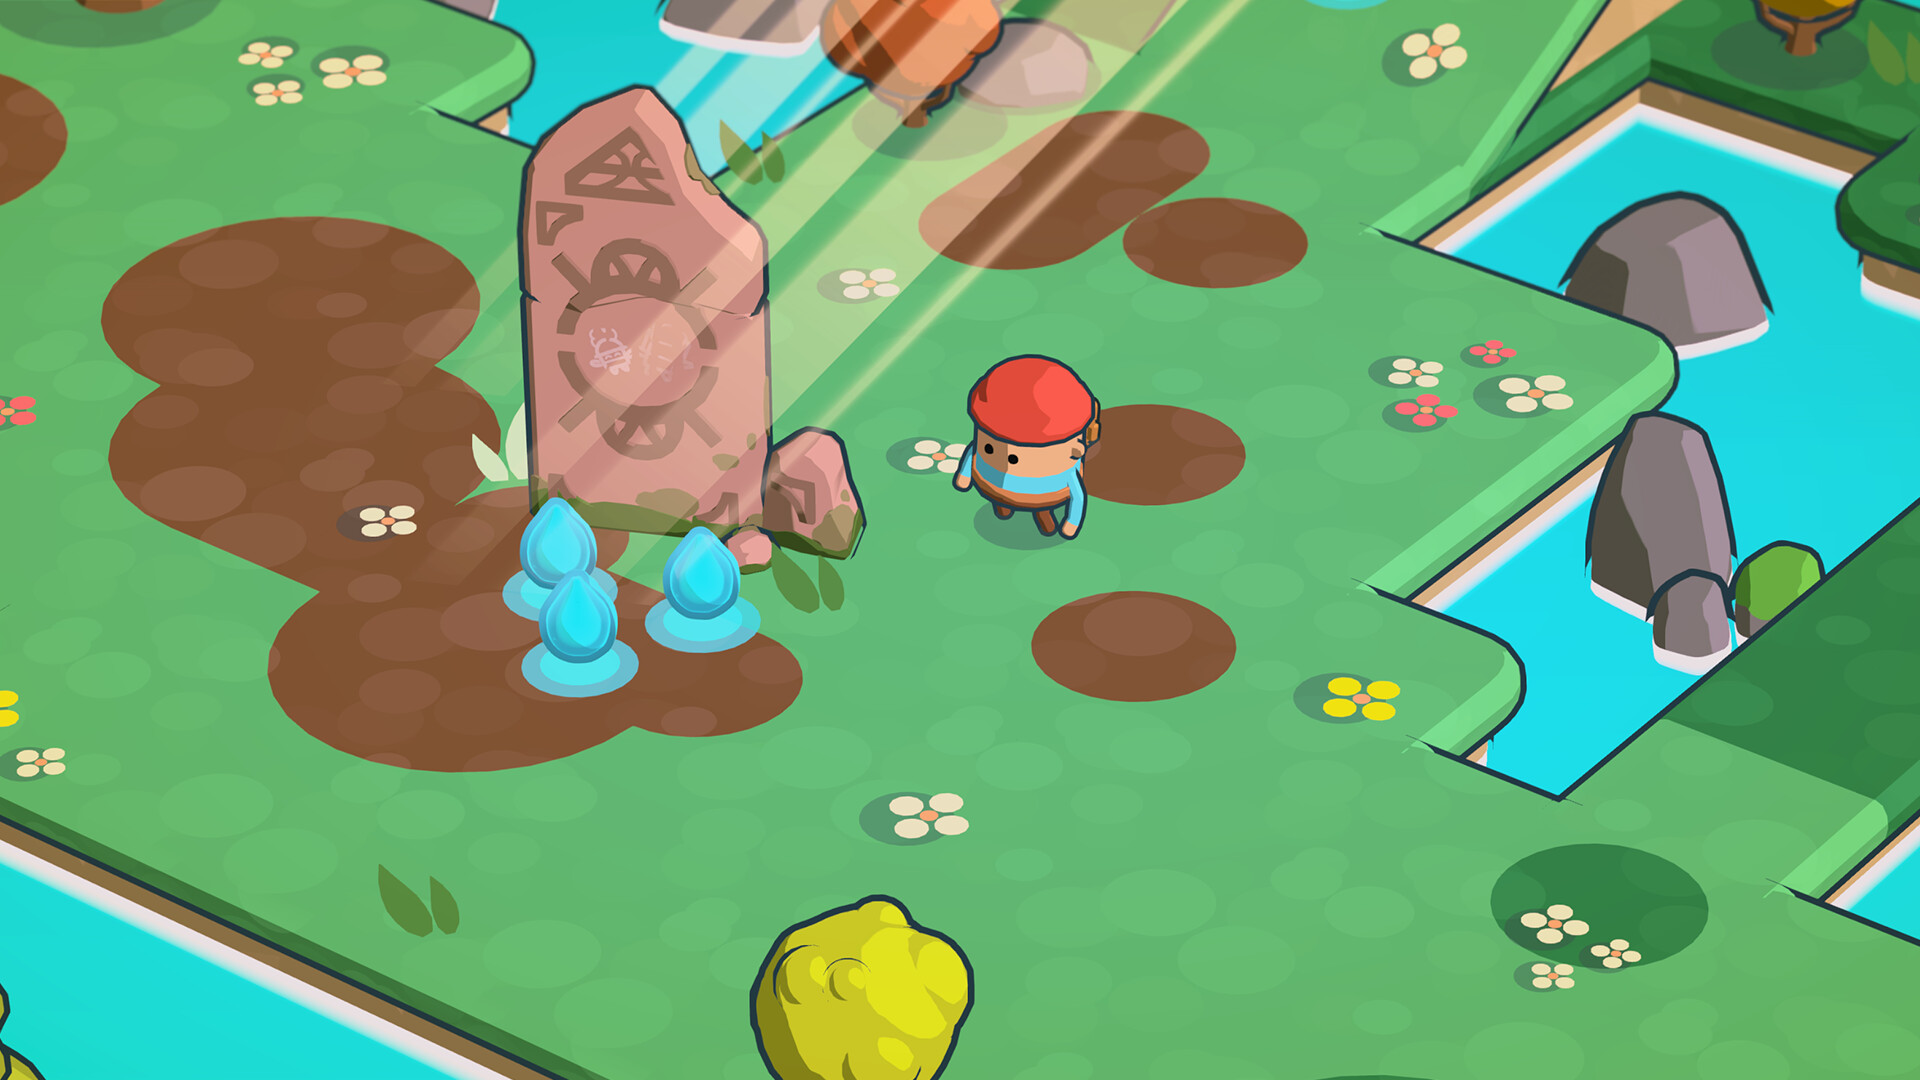 A screenshot from Pine Hearts. A beige figure wearing a red hat and blue shirt stands in a forest. There is some sort of stone monument in front of him.